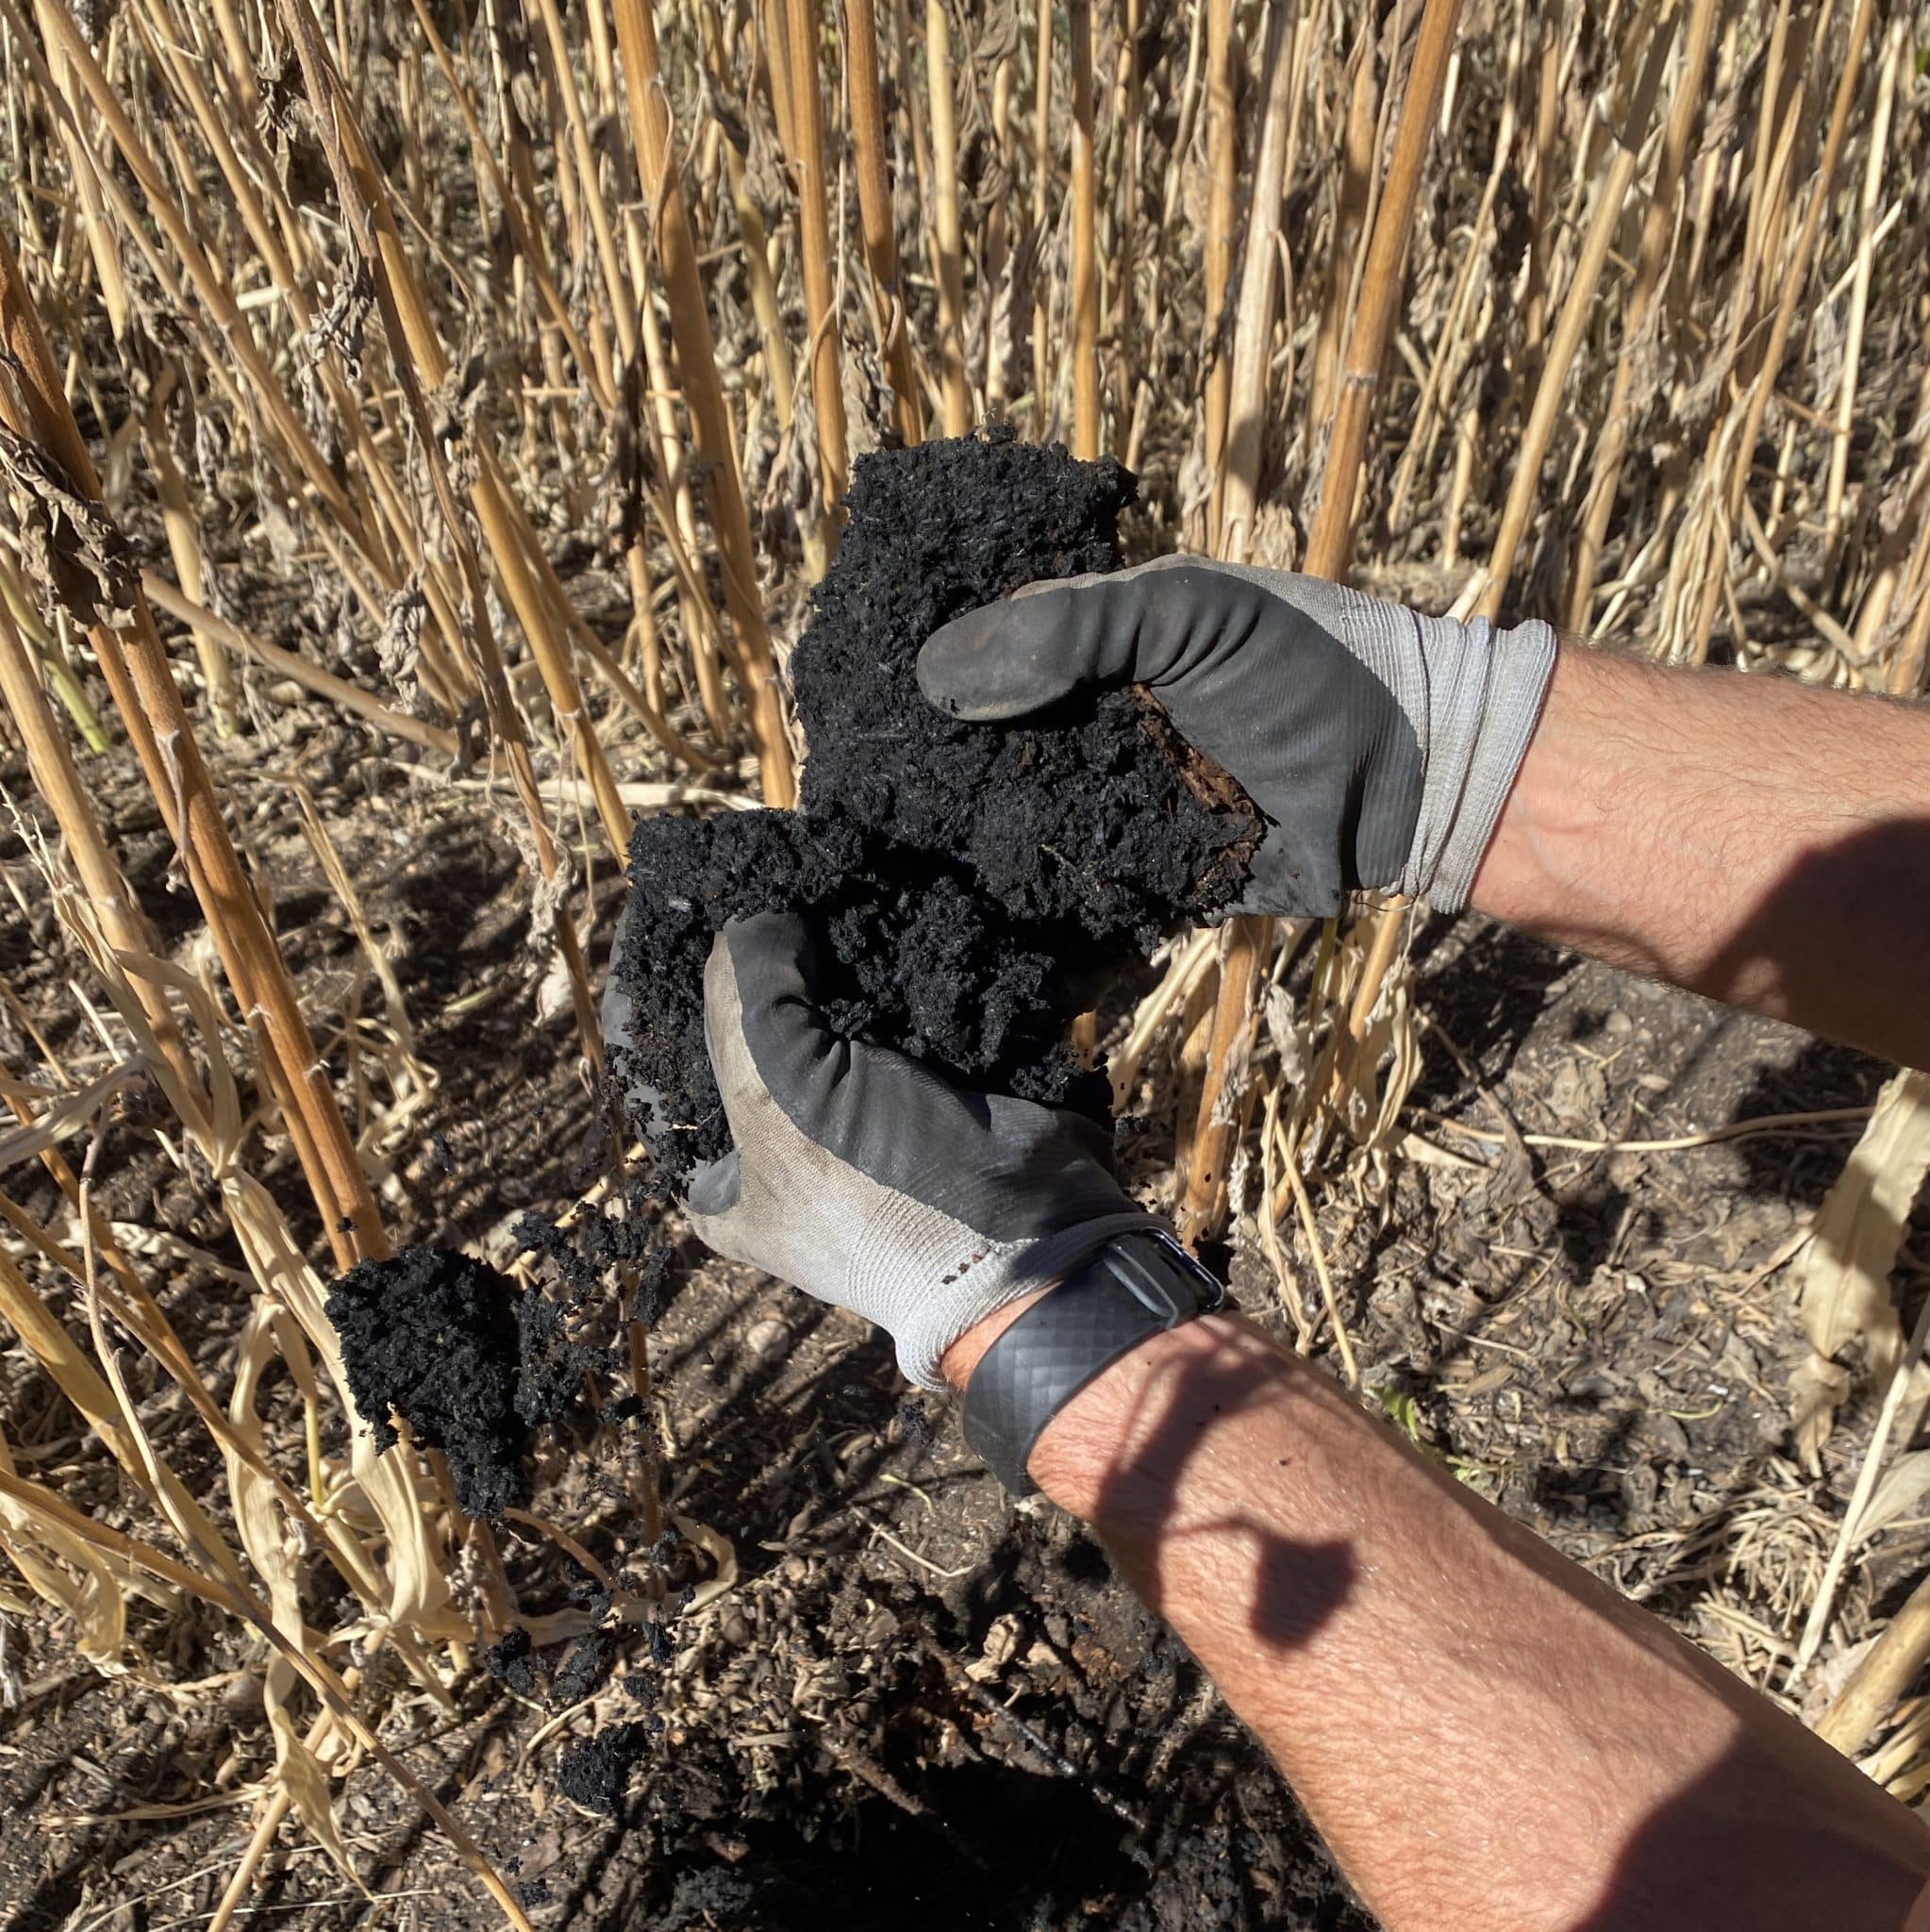 Quality biochar brings water, nutrient and microbial benefits to soil